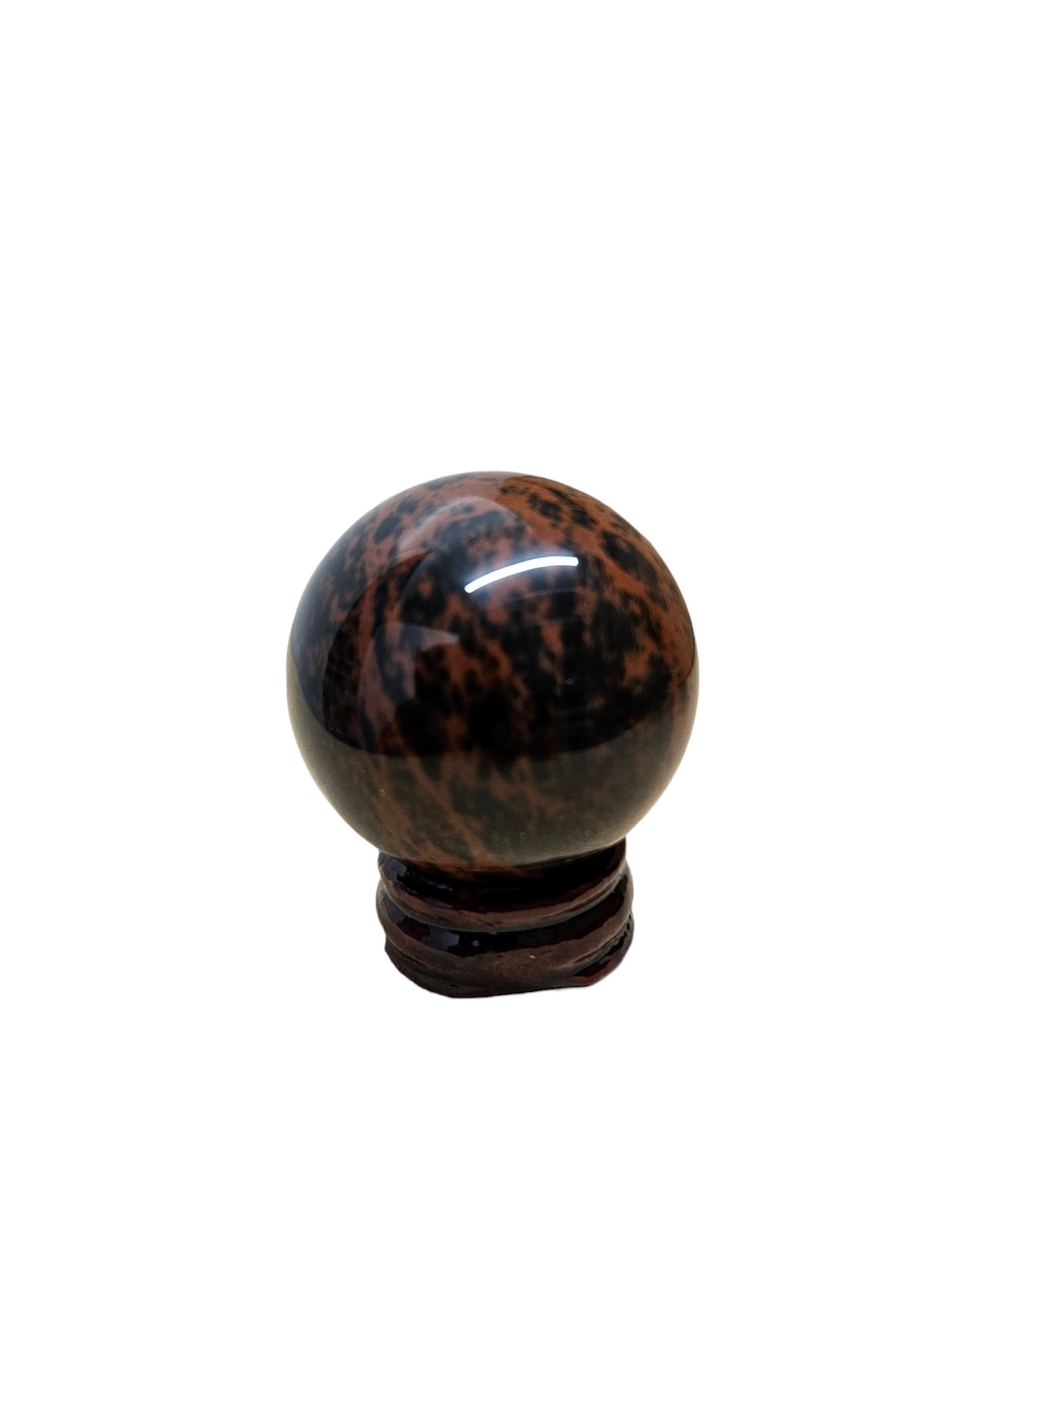 Mahogany Obsidian Sphere (wooden stand included)